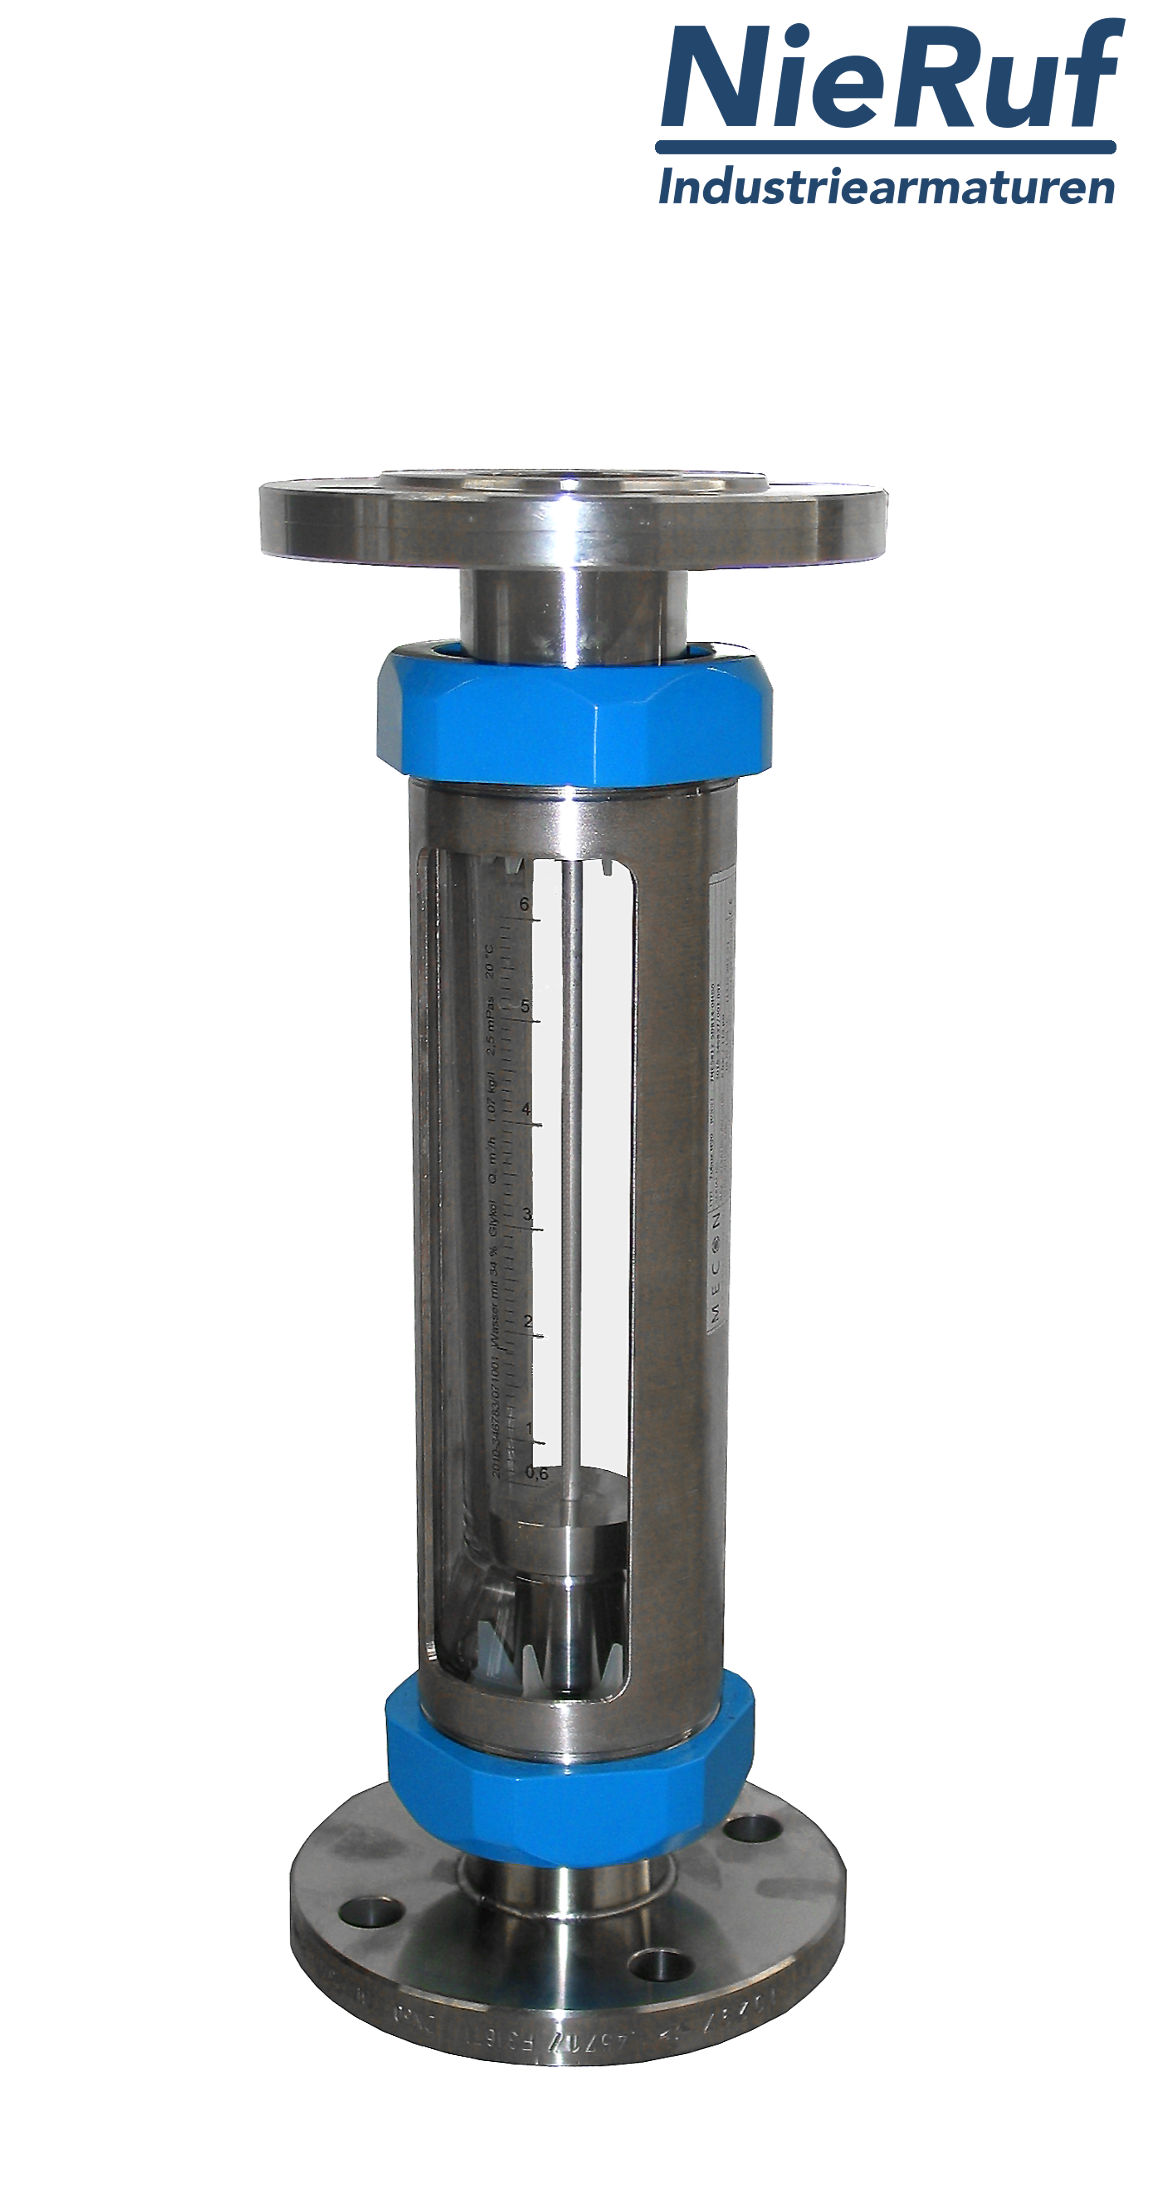 Variable area flowmeter stainless steel + borosilicate flange DN80 650.0 - 6500 l/h water FKM